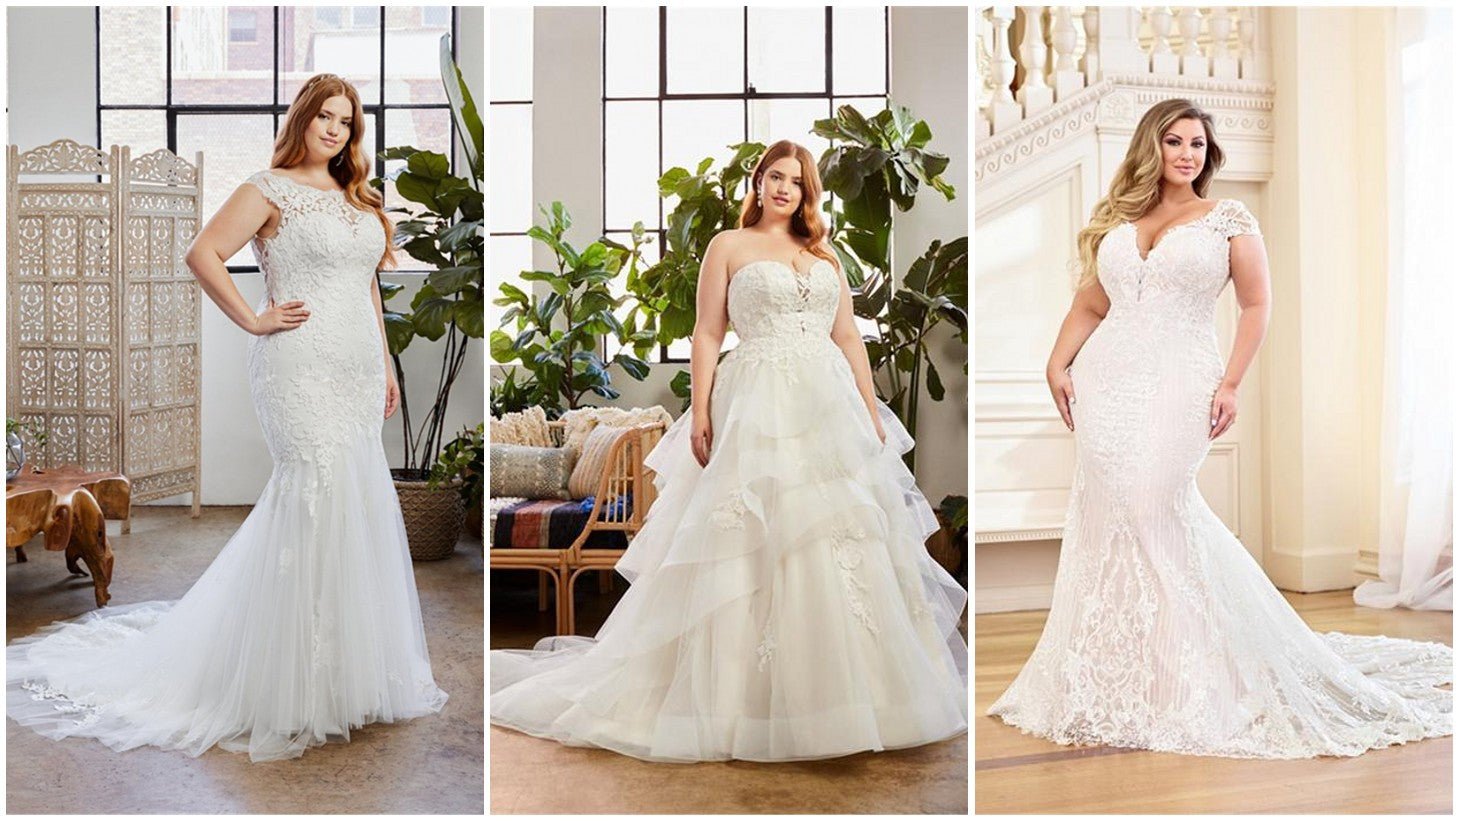 New Style Plus Size Wedding Dresses From Bridelily